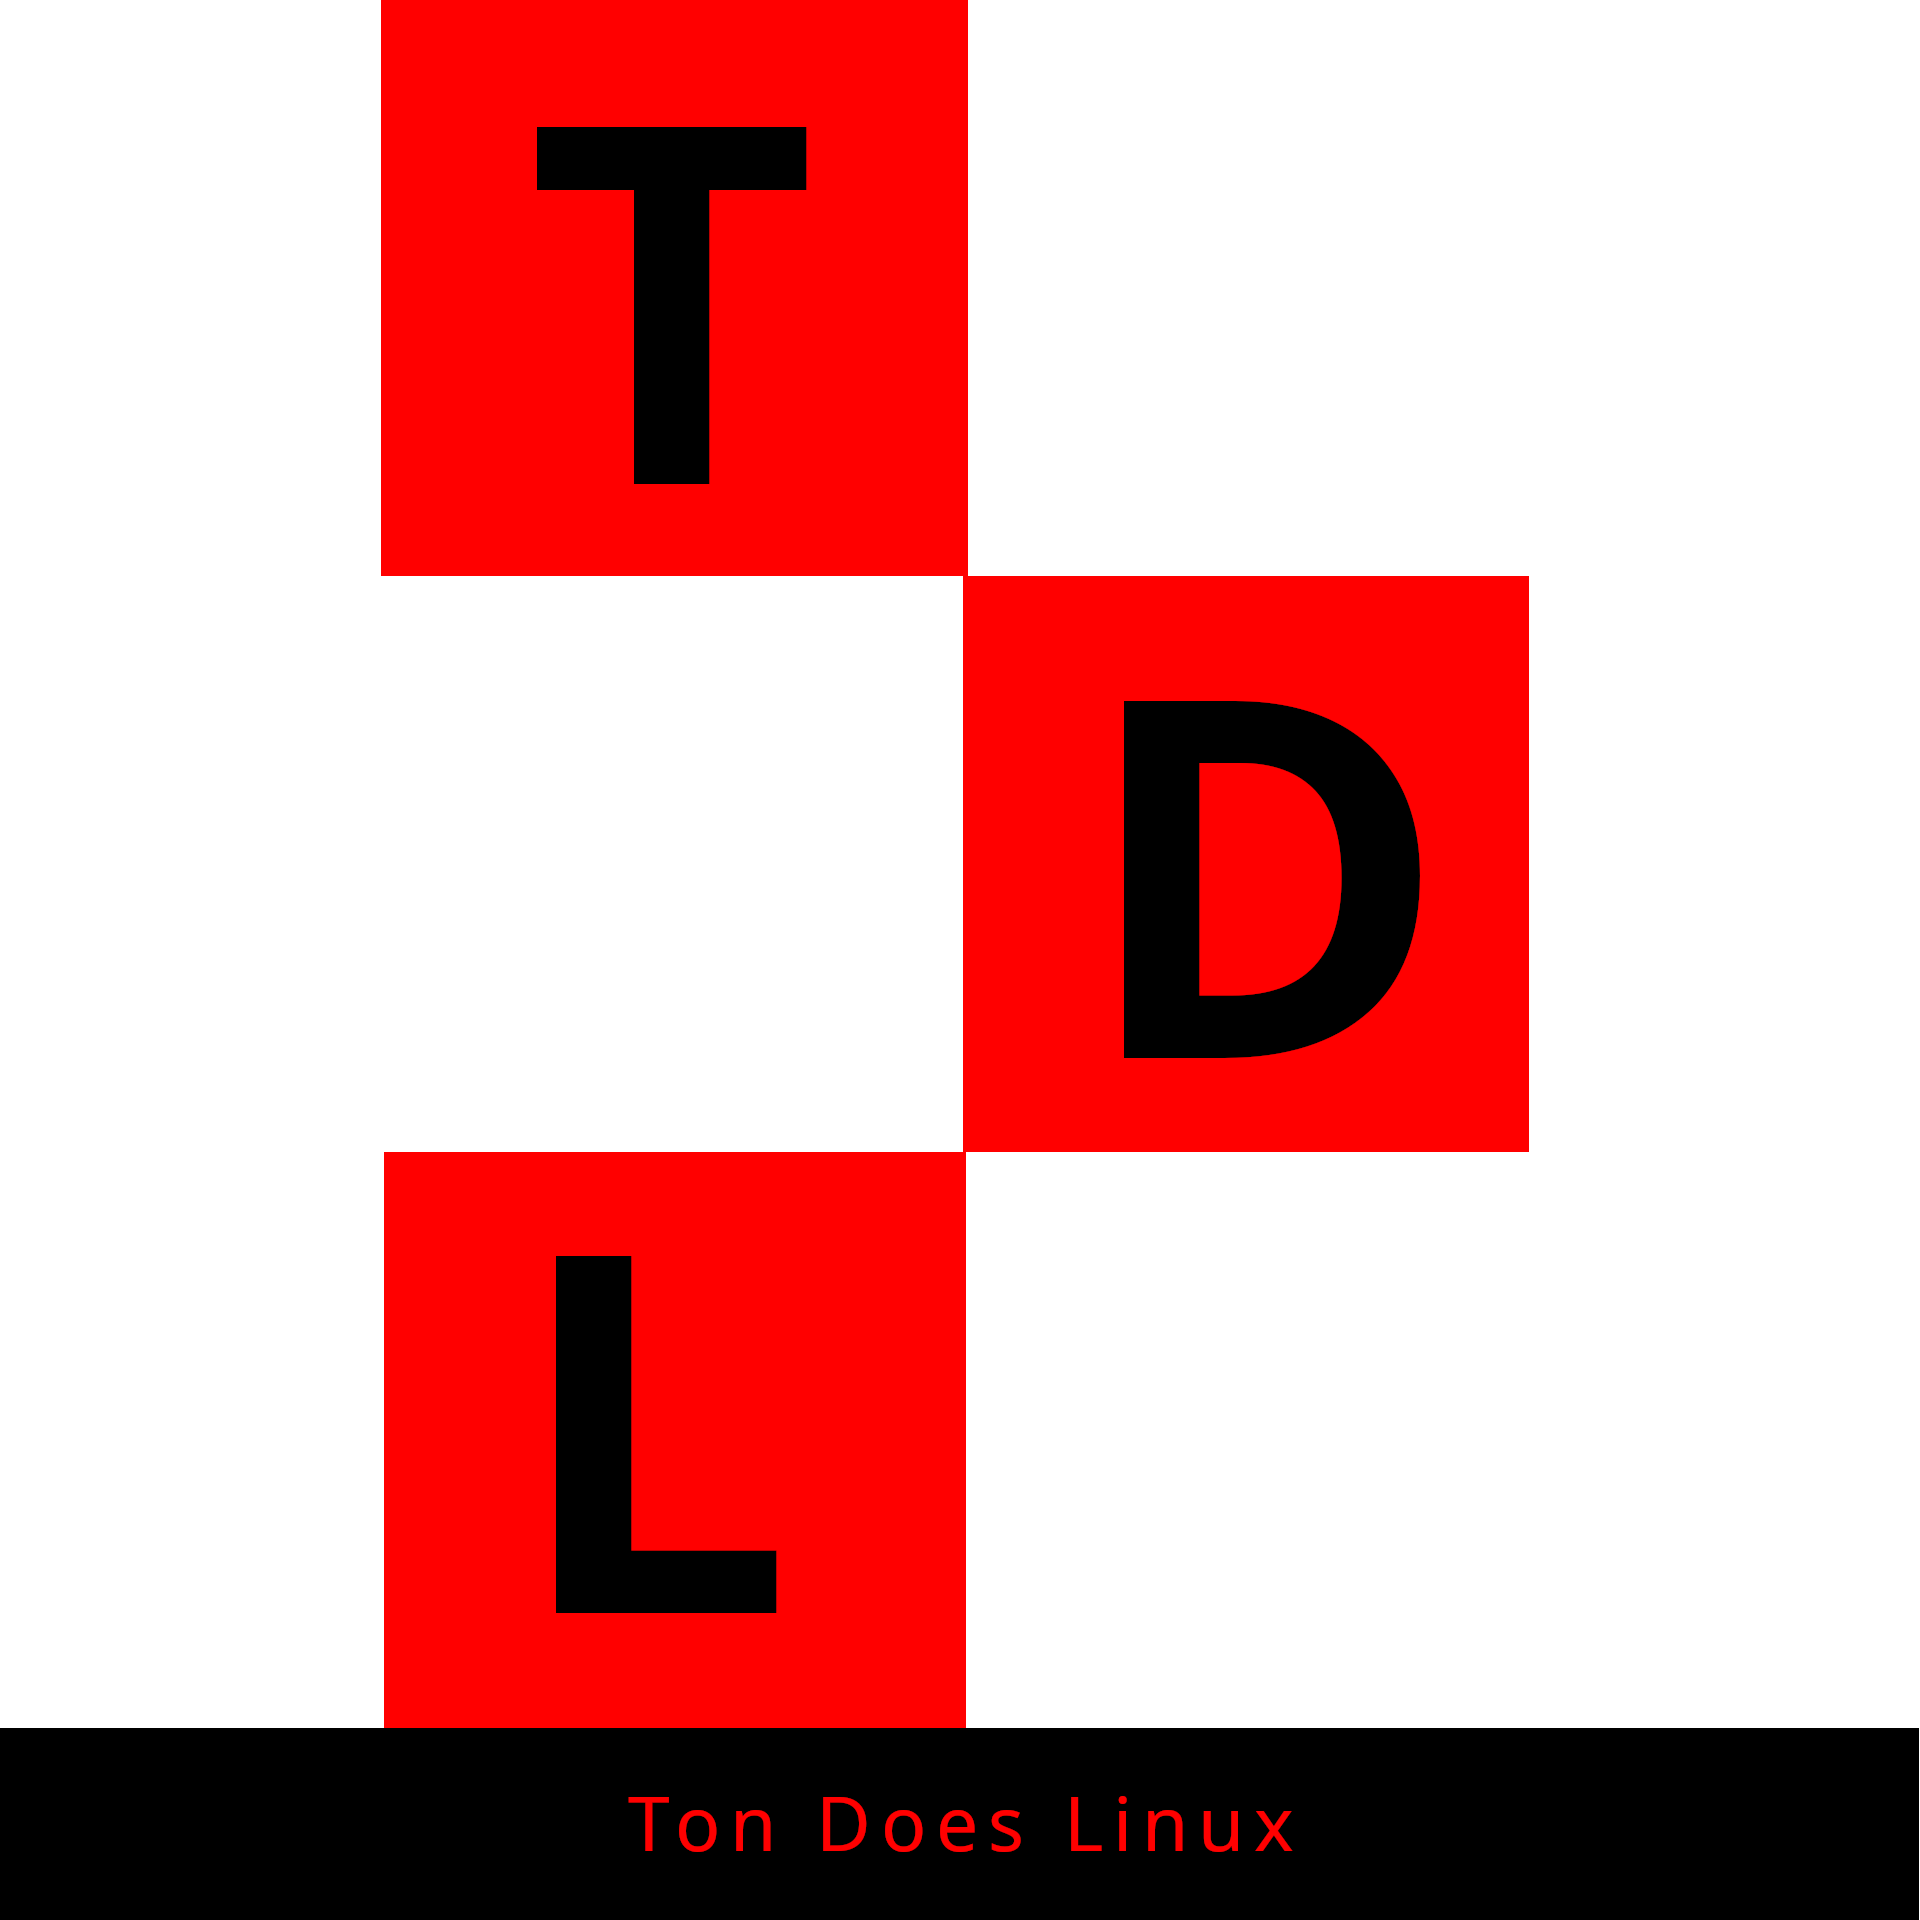 Ton Does Linux is a Youtube and FaceBook site dedicated to bringing Linux to the desktop of all users.